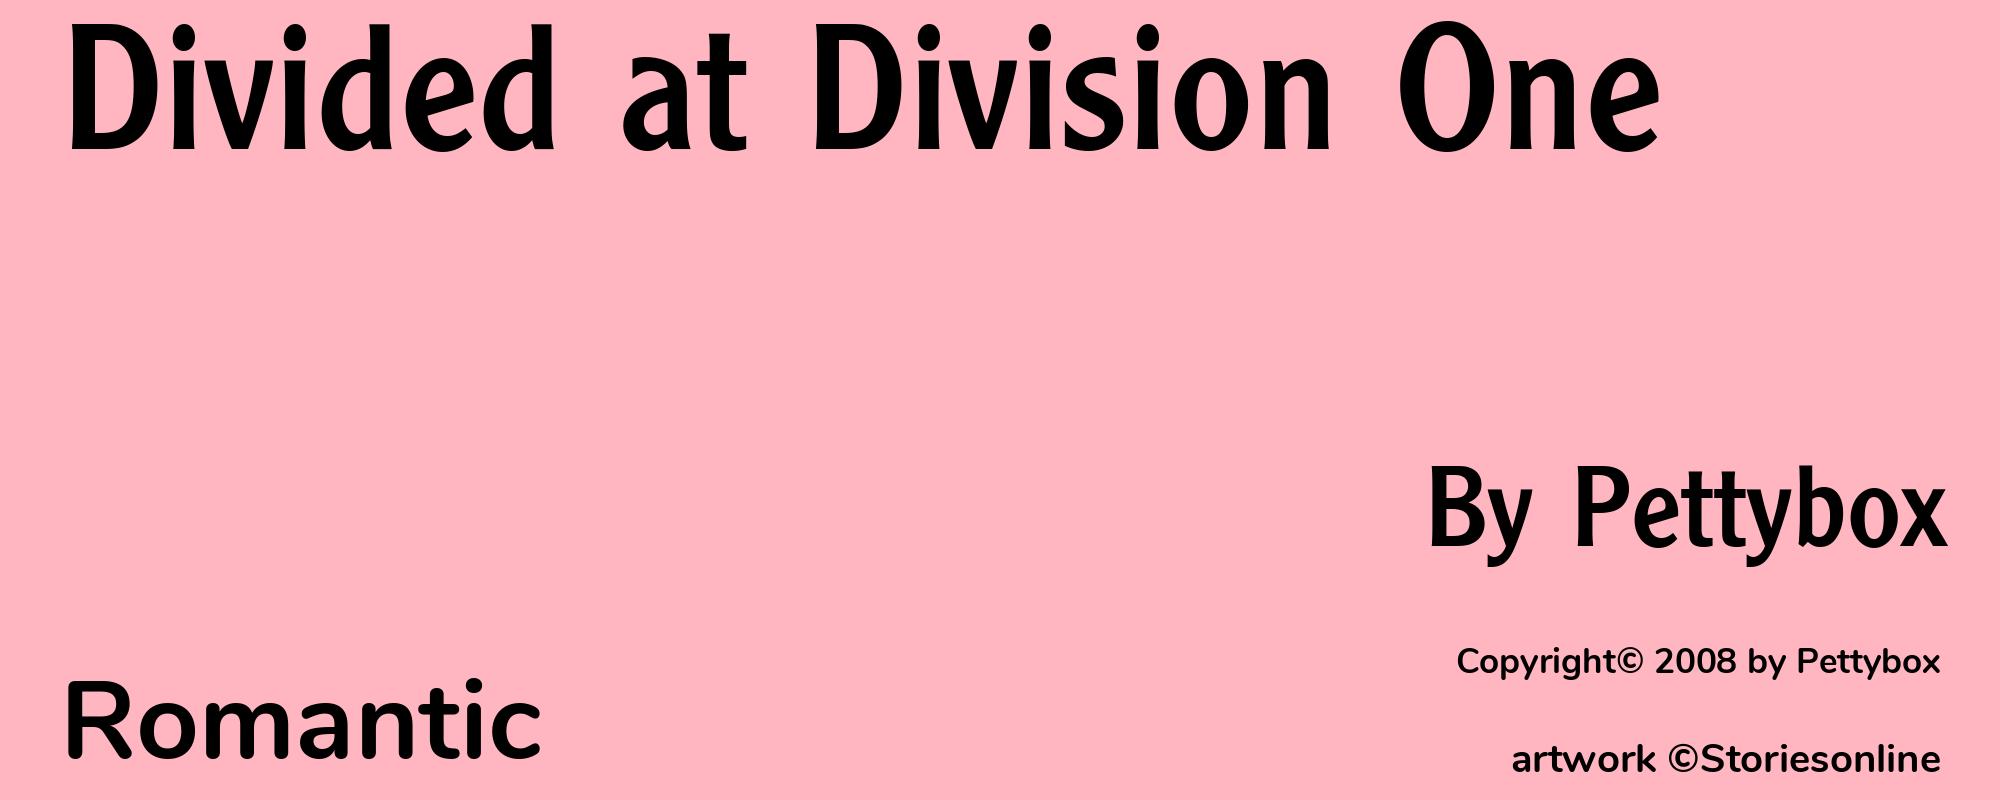 Divided at Division One - Cover